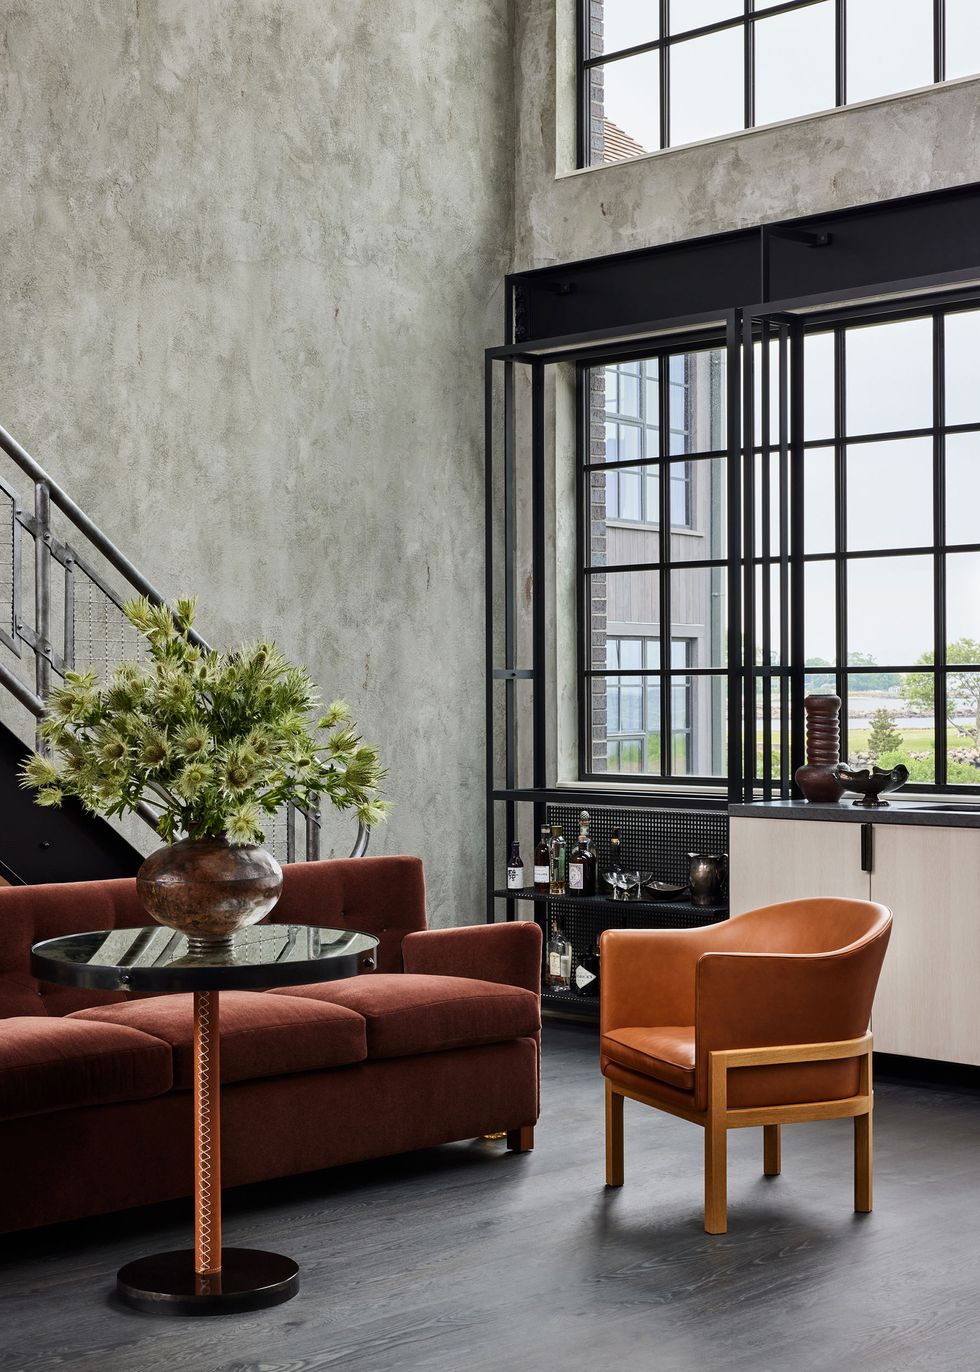 Industrial Interior design with metal and earth tones